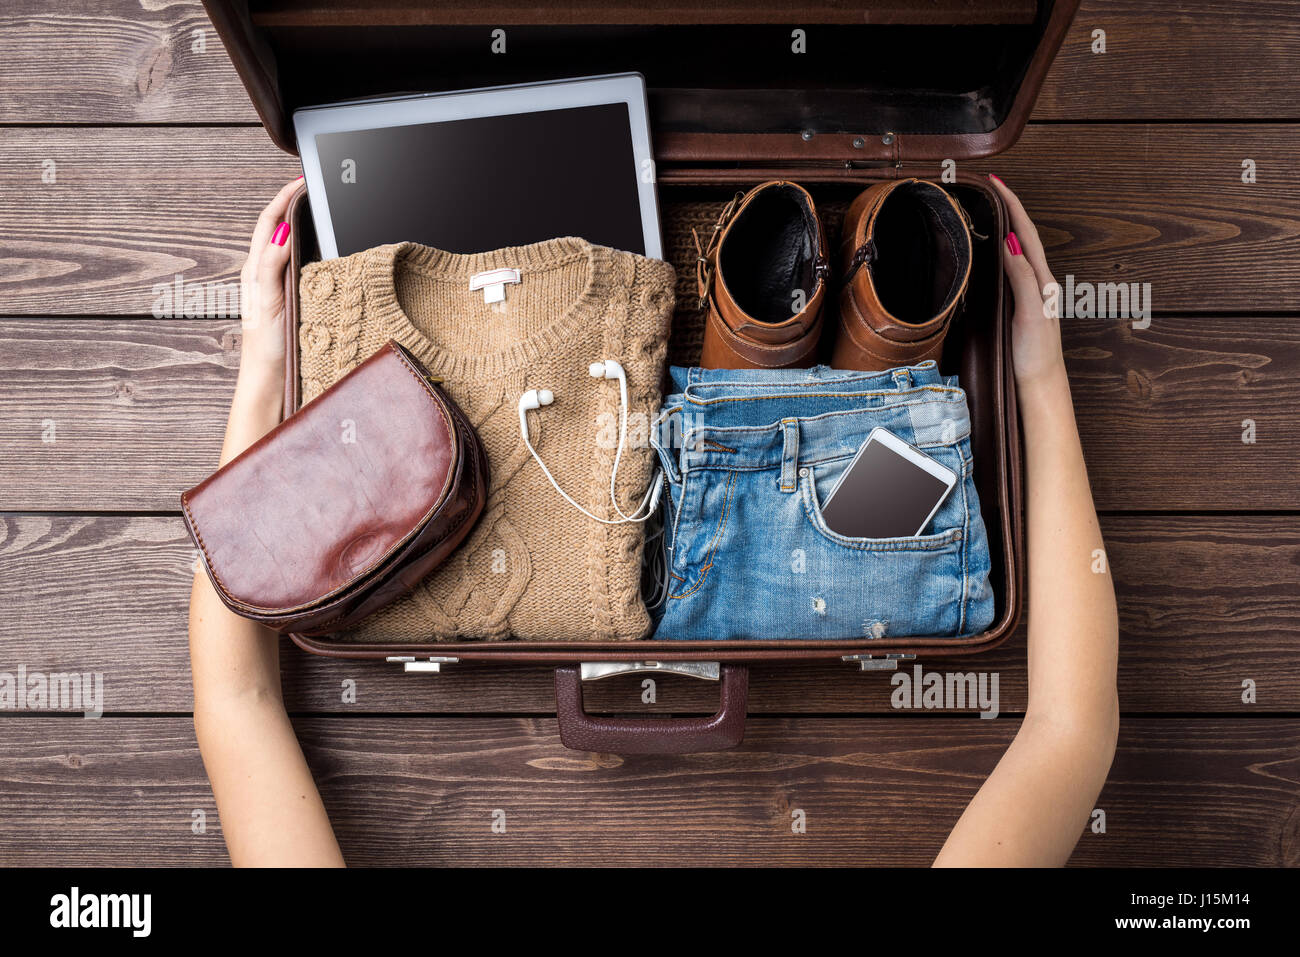 Travel preparations concept with open suitcase and woman's casual clothes Stock Photo